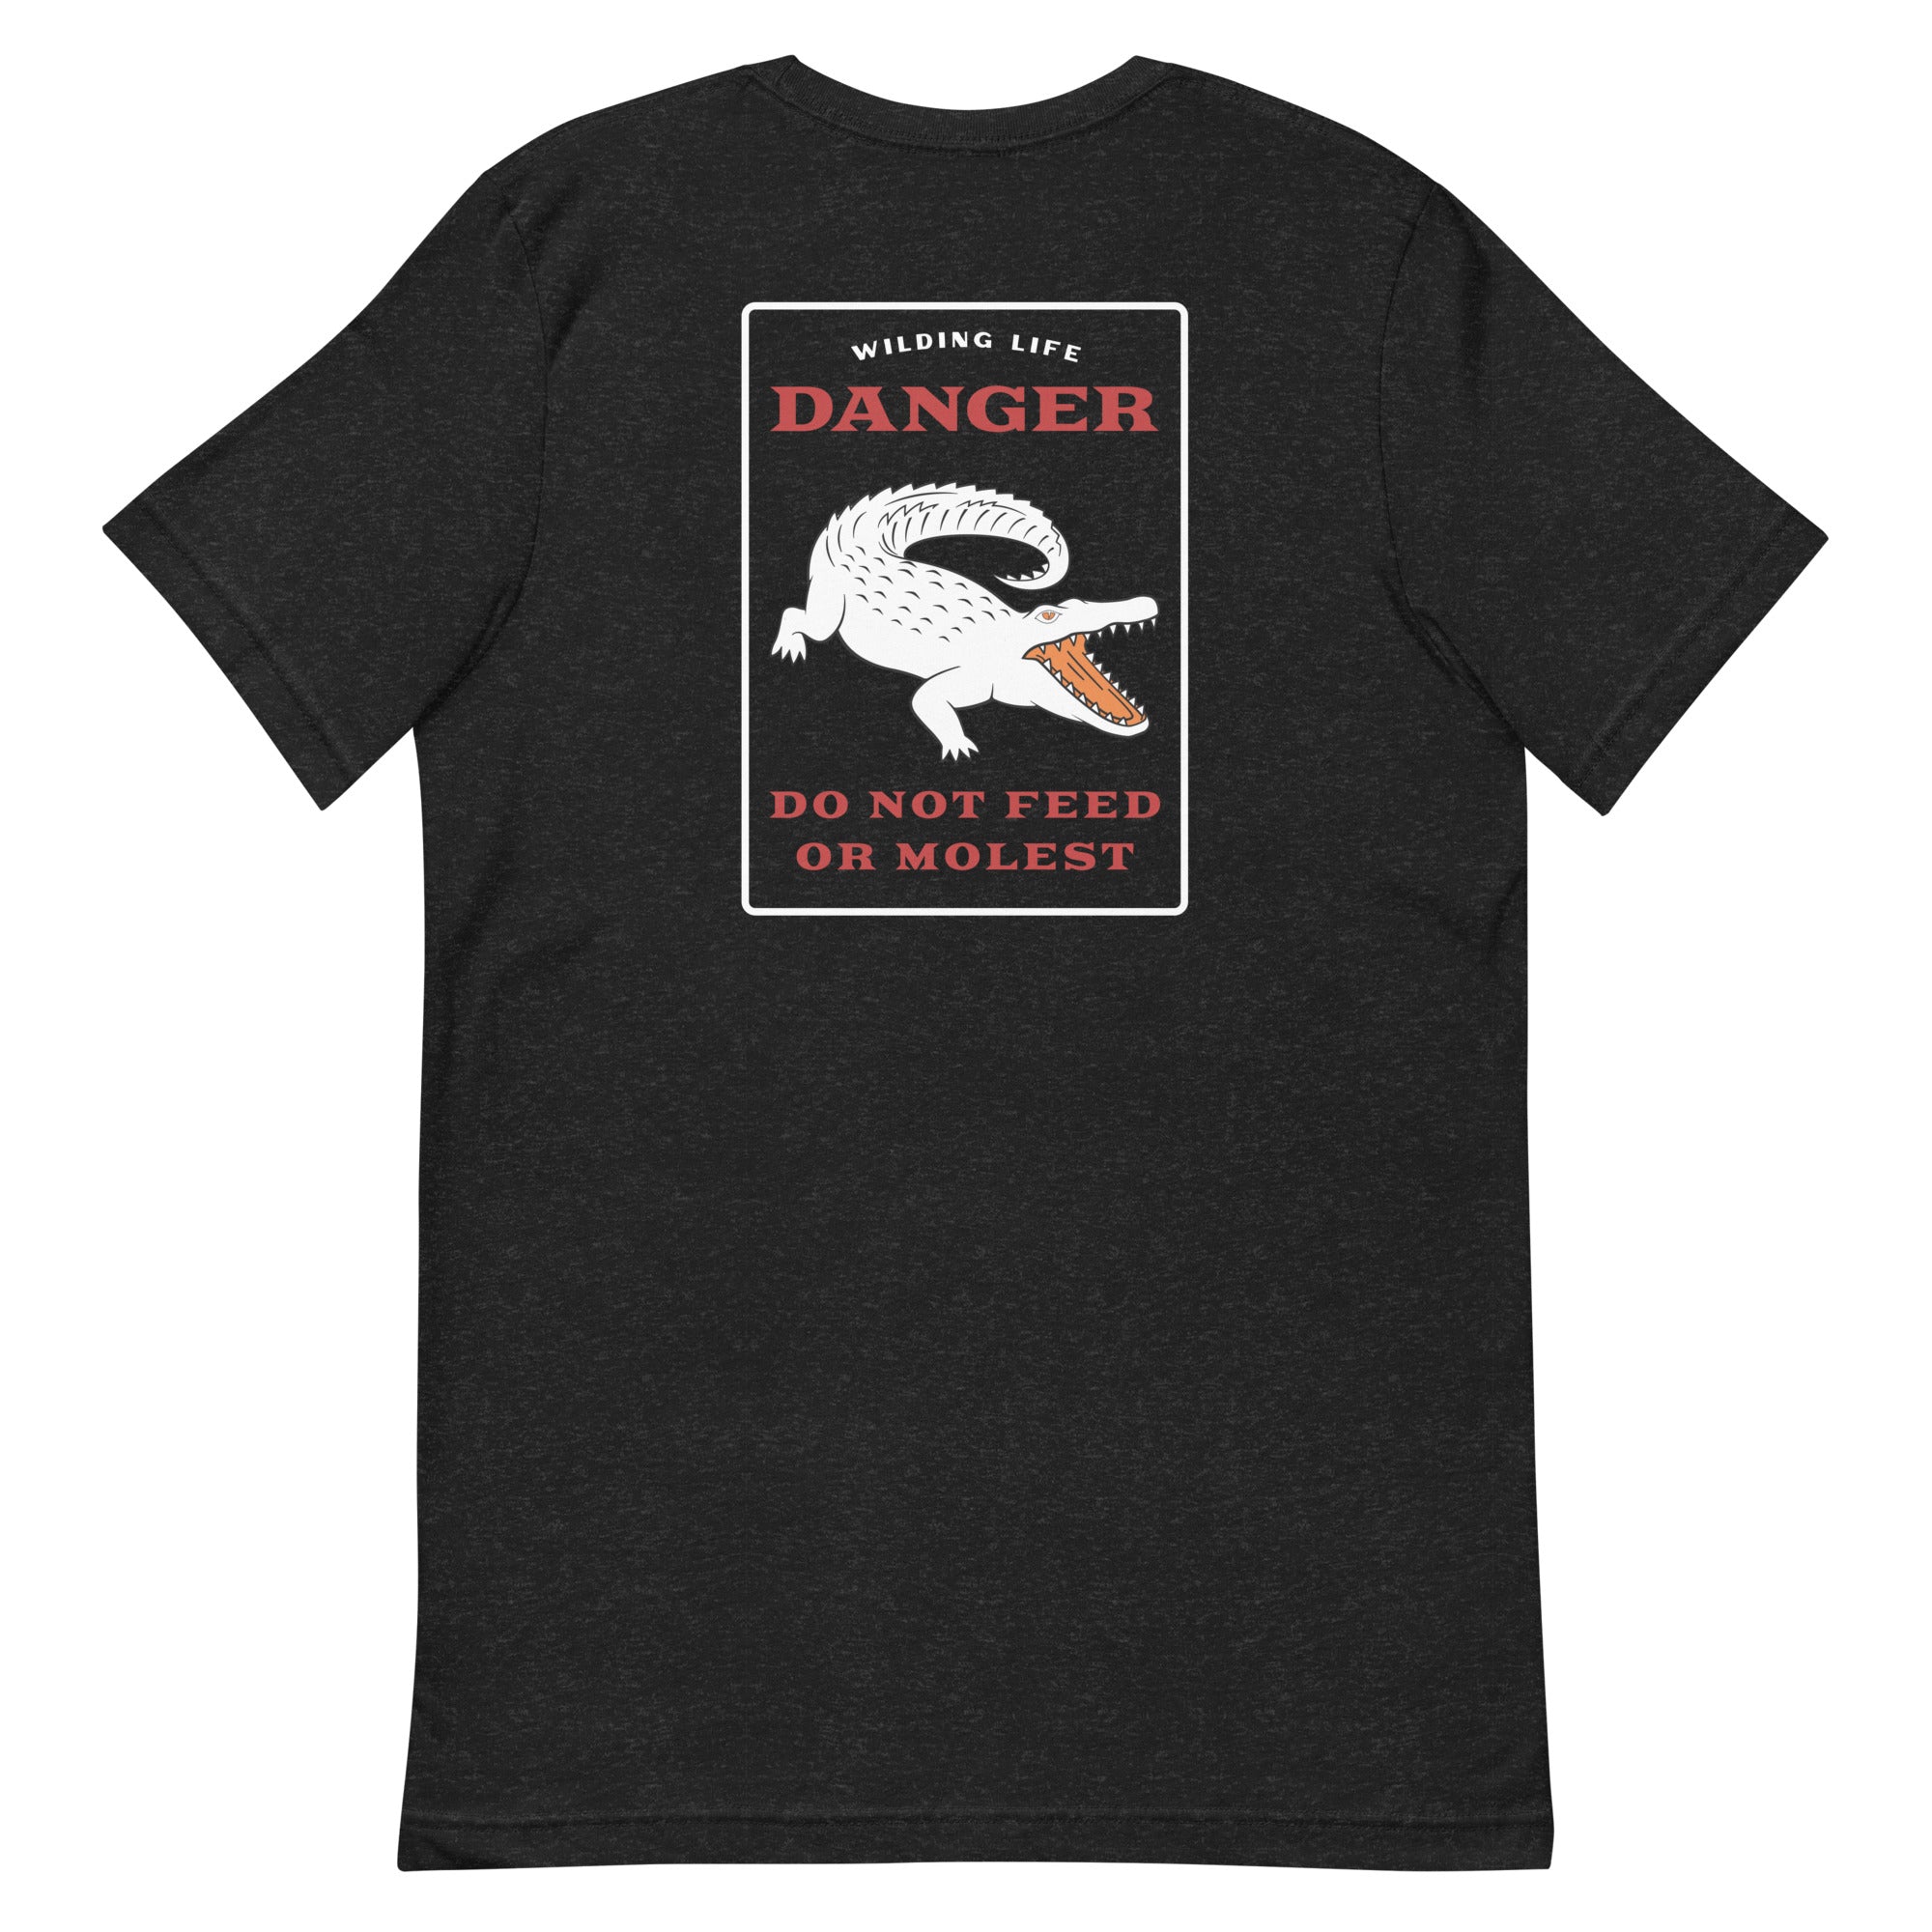 Don't Feed the Gators T-shirt - Wilding Life